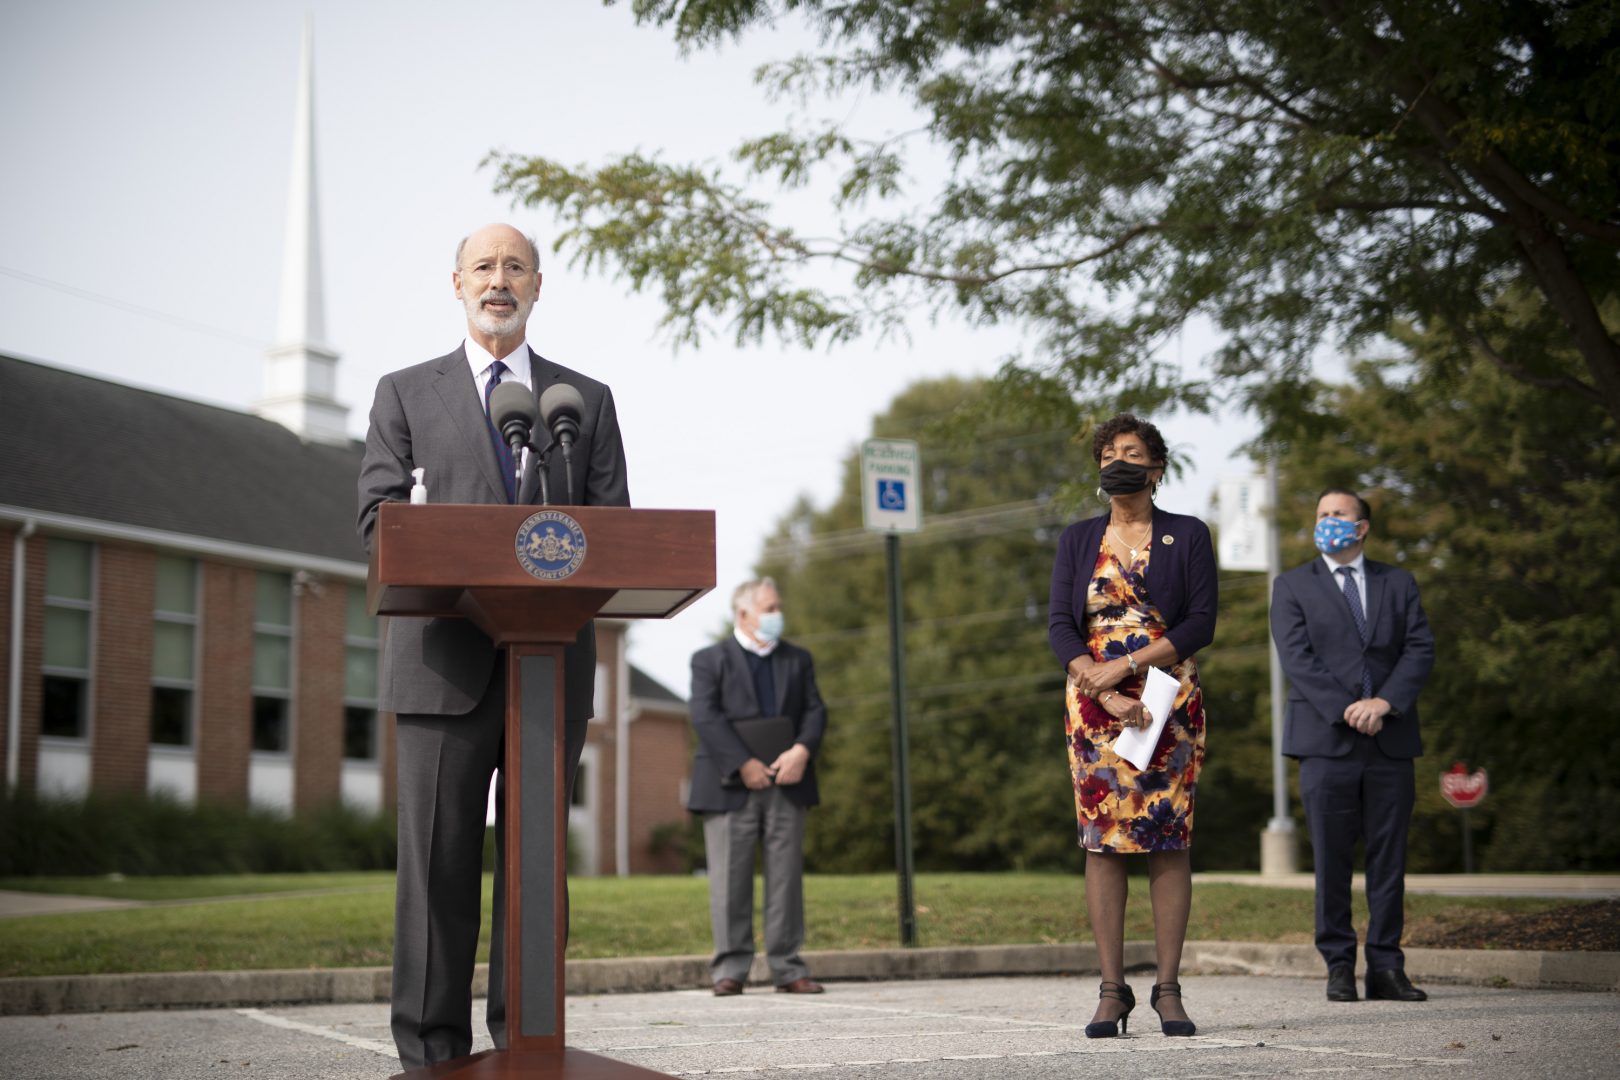 Pennsylvania Governor Tom Wolf speaking to the press outside York Grace Brethren Church in York, on Tuesday, Sept. 15. Wolf was urging immediate legislative action on voting rules ahead of the presidential election Nov. 3. 